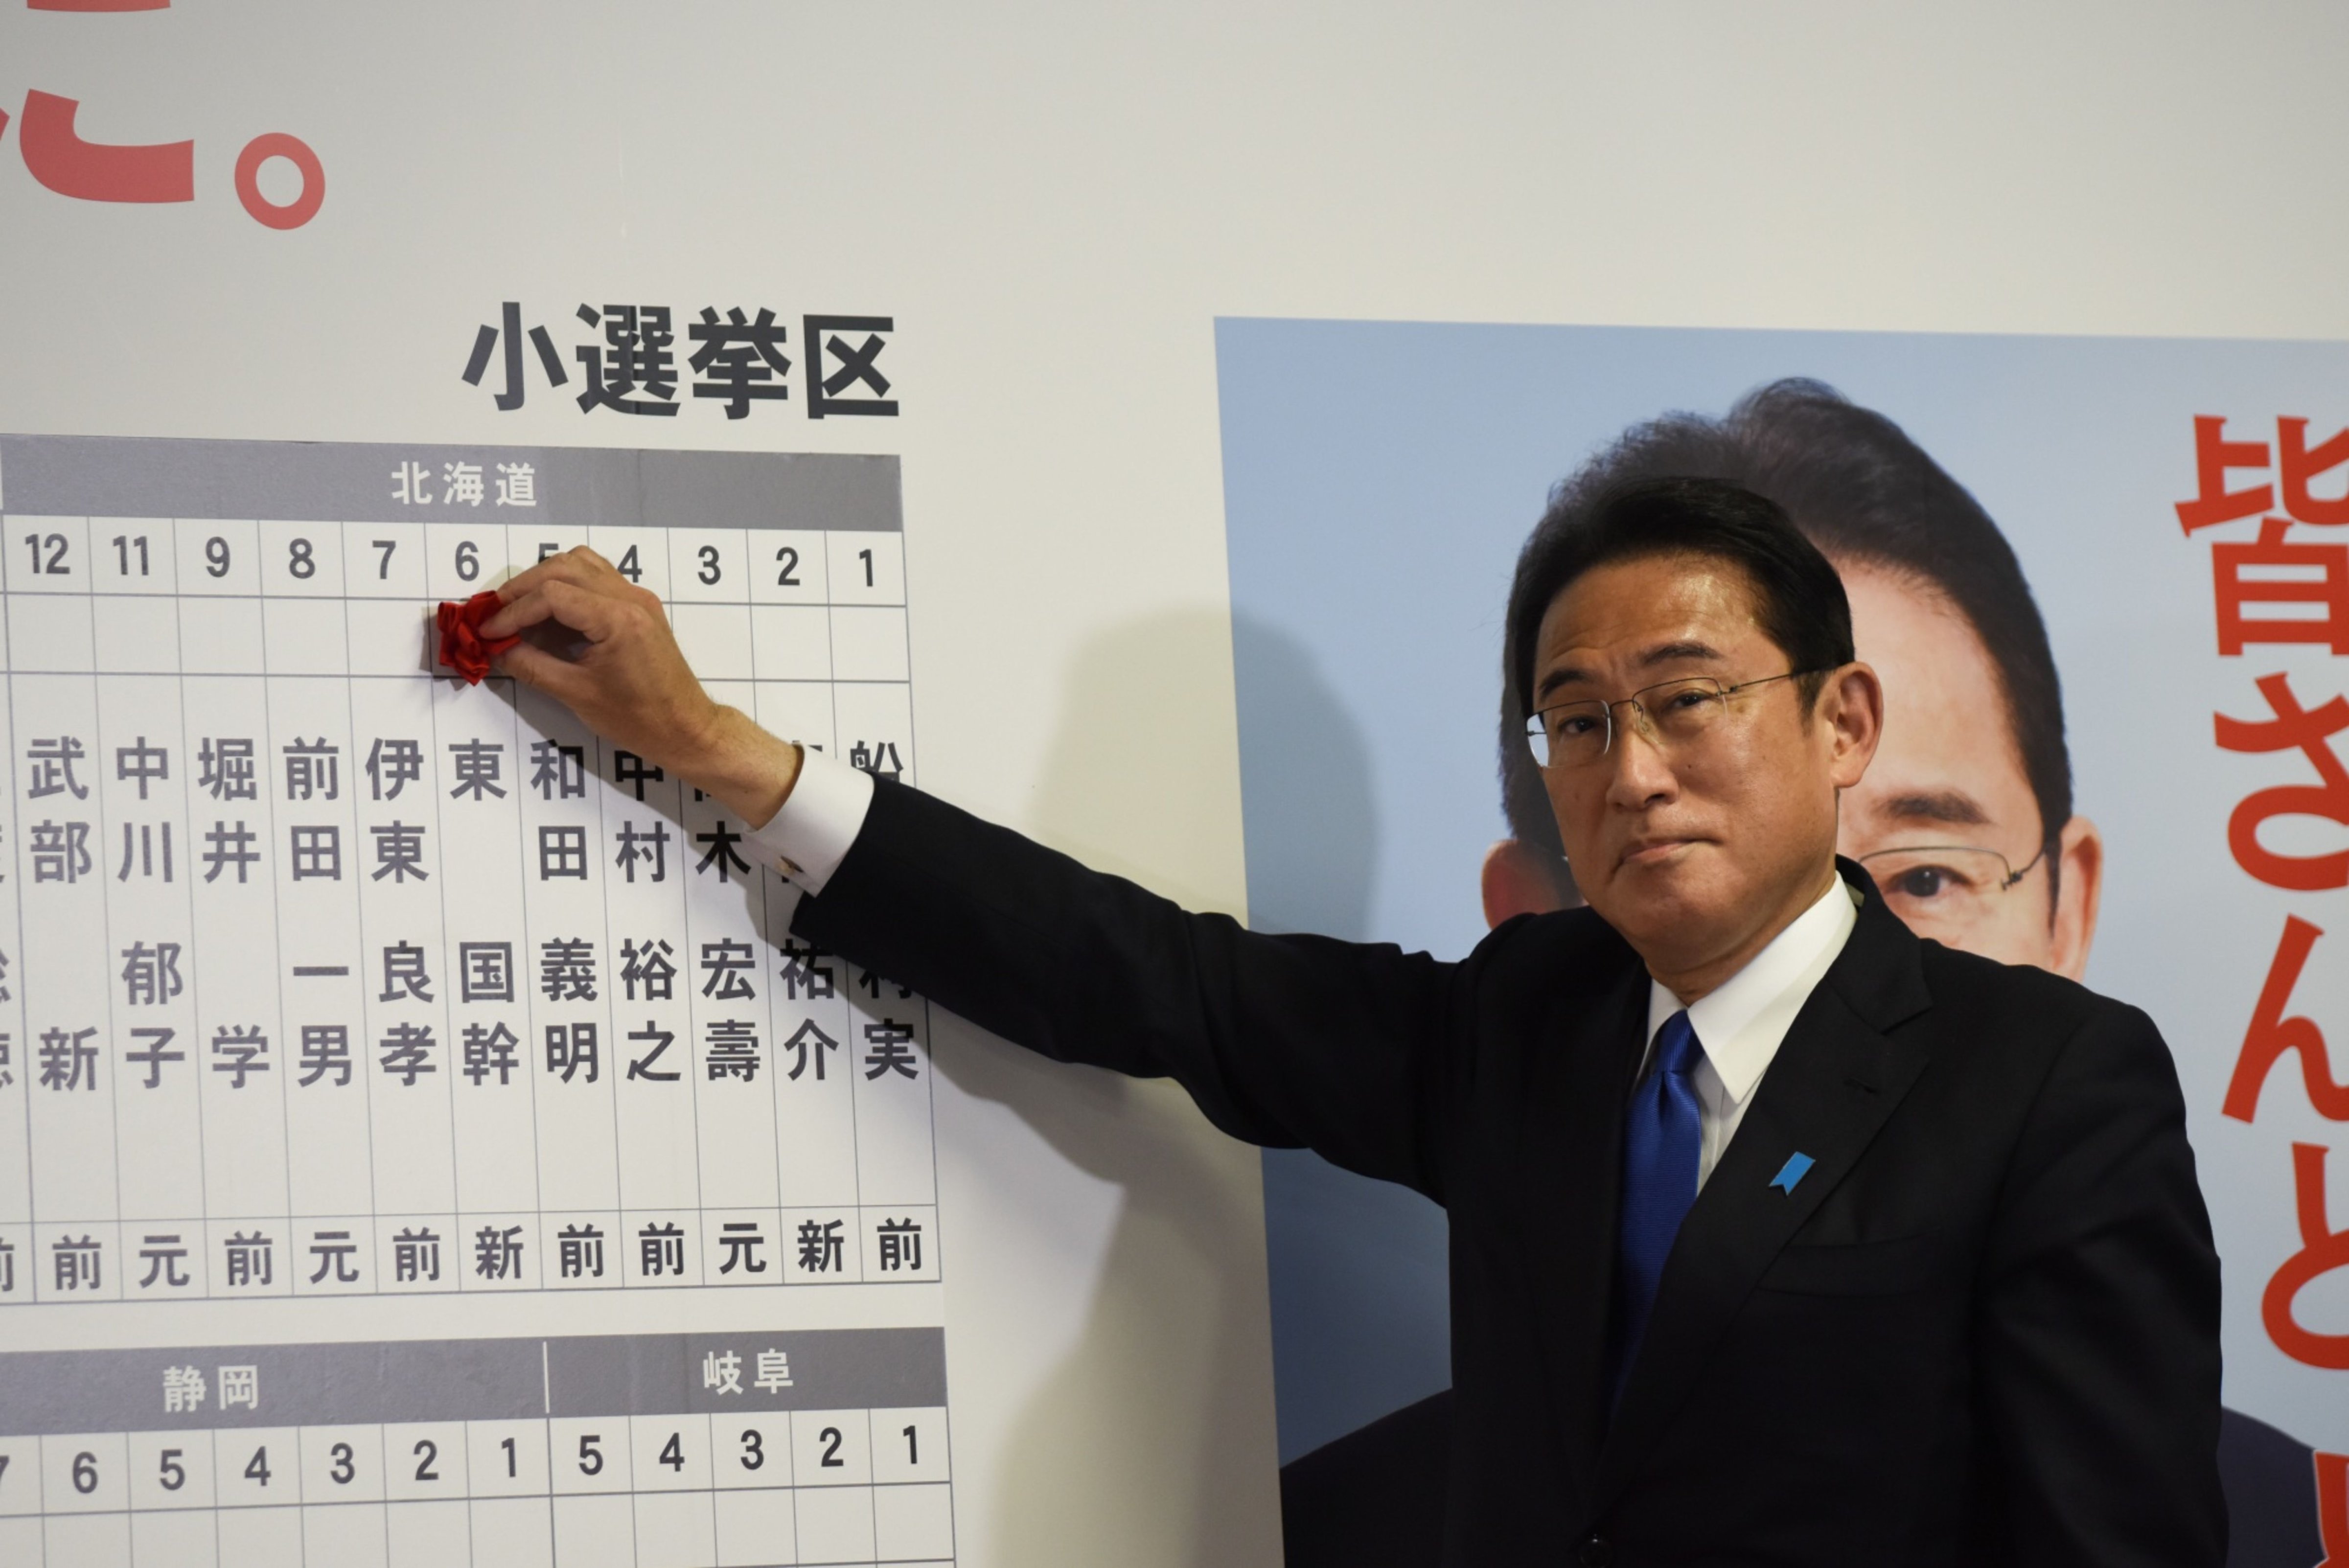 Fumio Kishida places a red paper rose on a LDP candidate's name to indicate an election victory on Oct. 31. (© 2021 Bloomberg Finance LP)